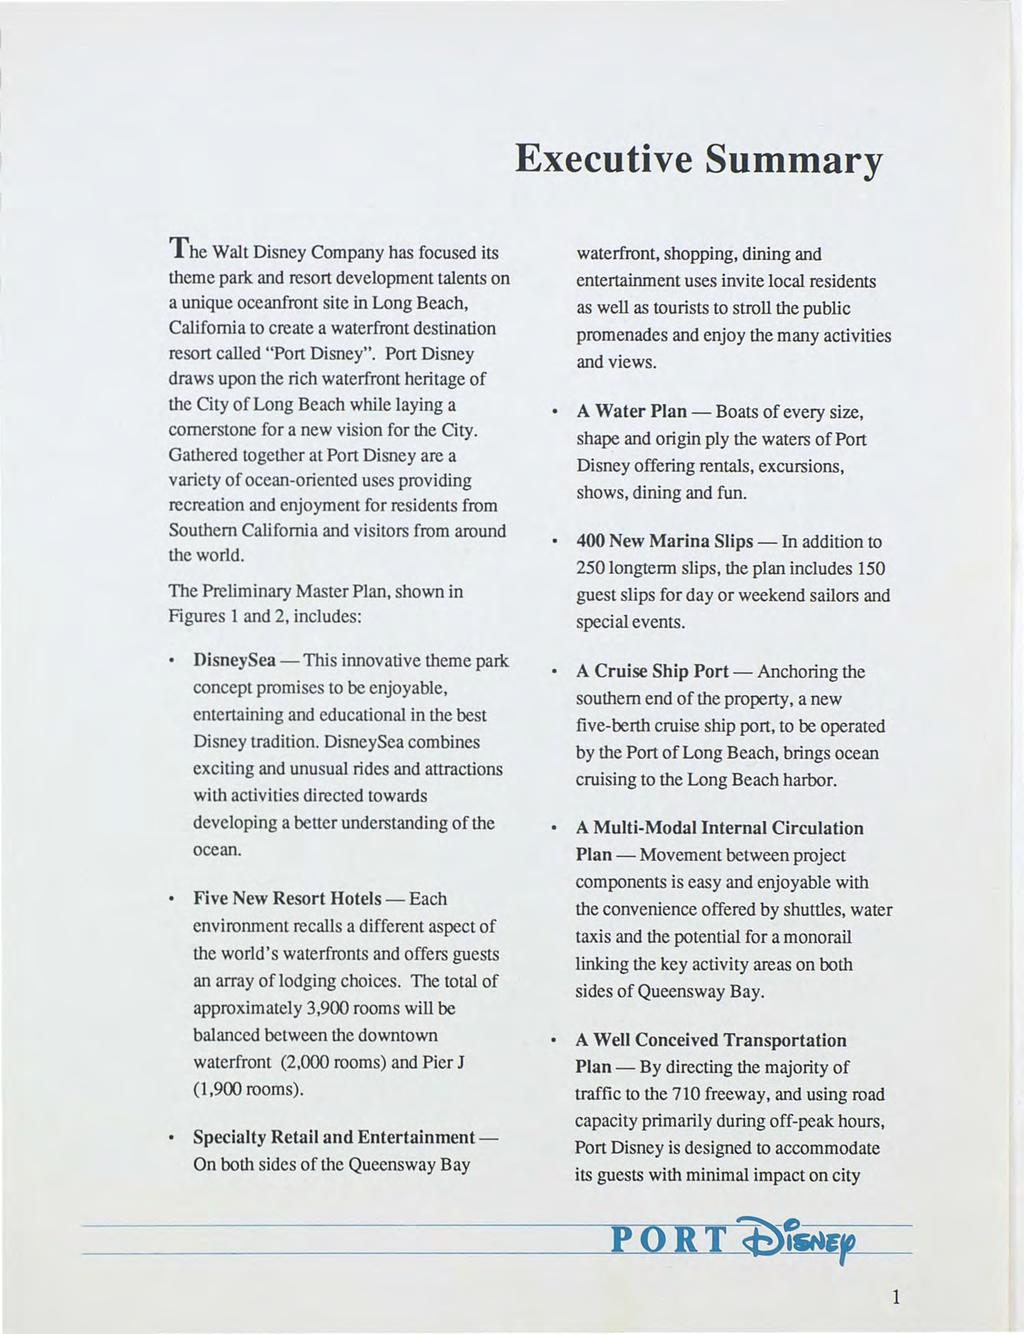 Executive Summary The Walt Disney Company has focused its theme park and resort development talents on a unique oceanfront site in Long Beach, California to create a waterfront destination resort